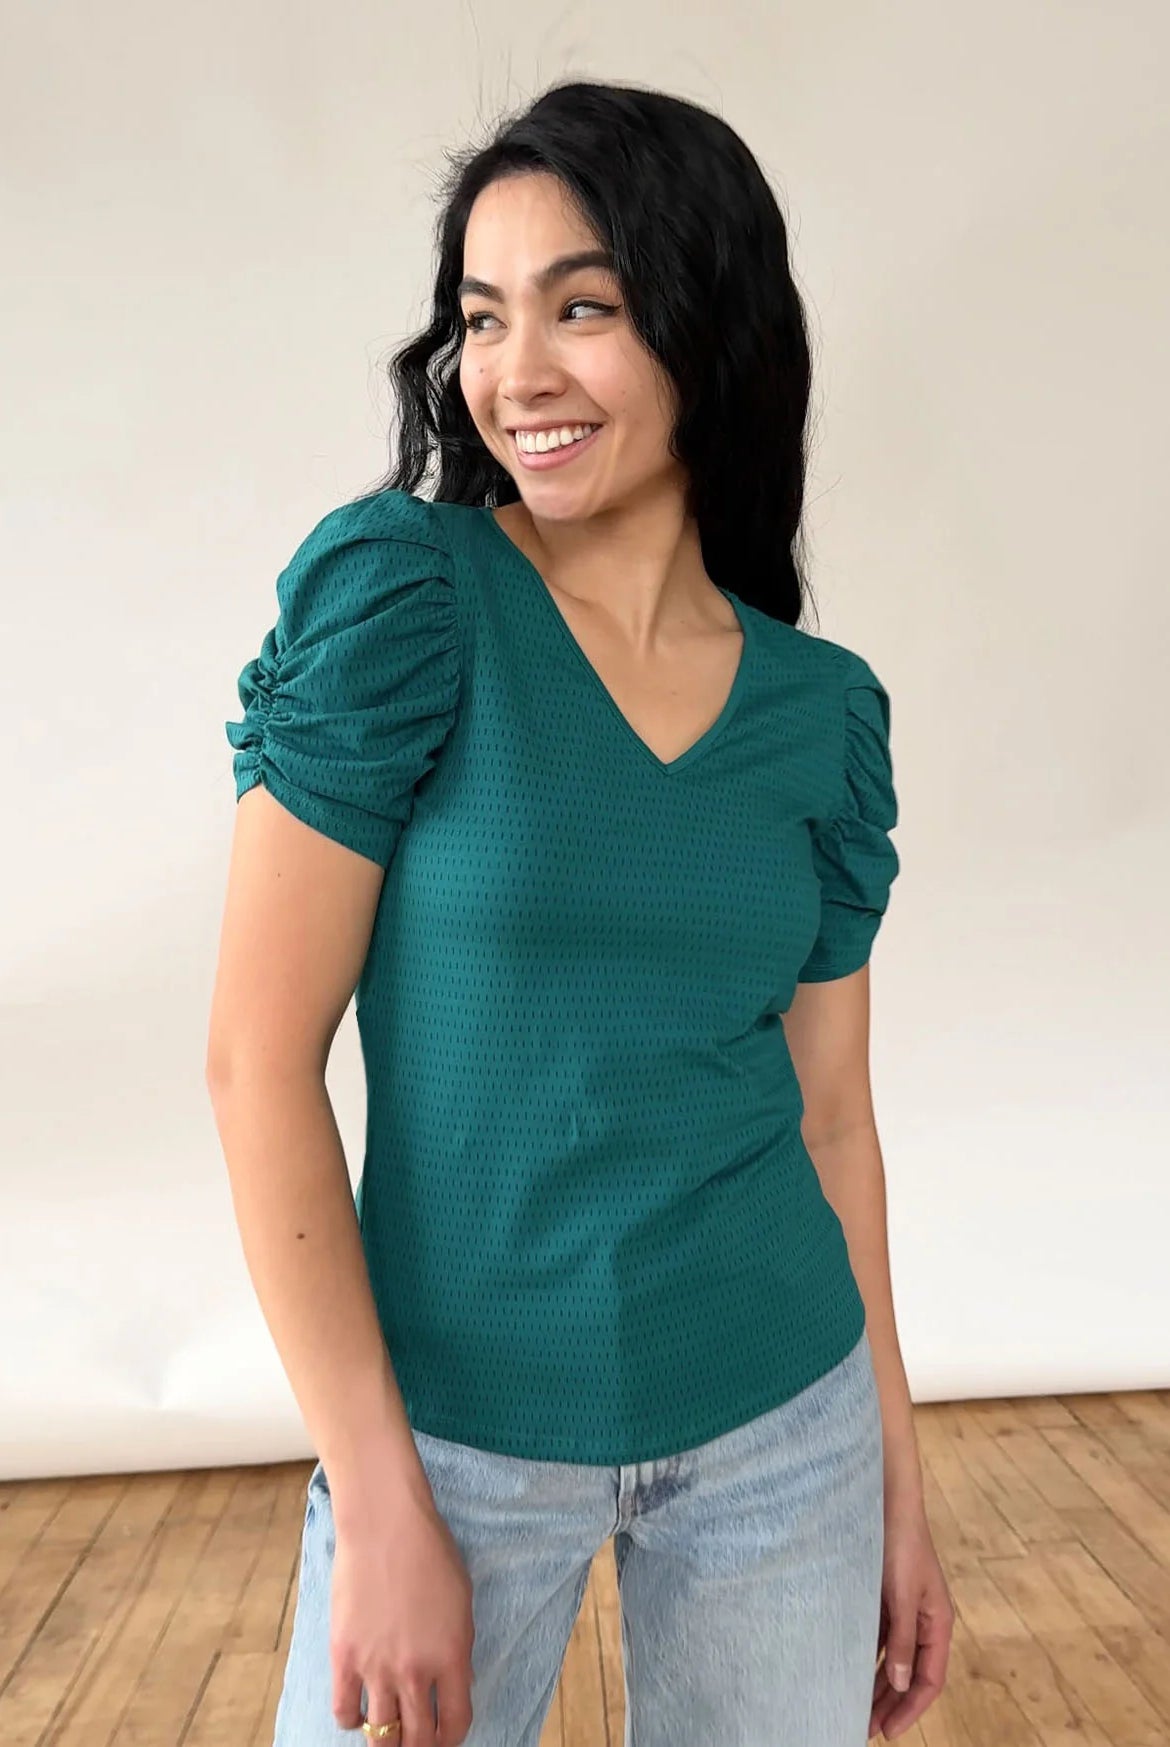 Teal/Navy Puff Sleeve Top Apex Ethical Boutique